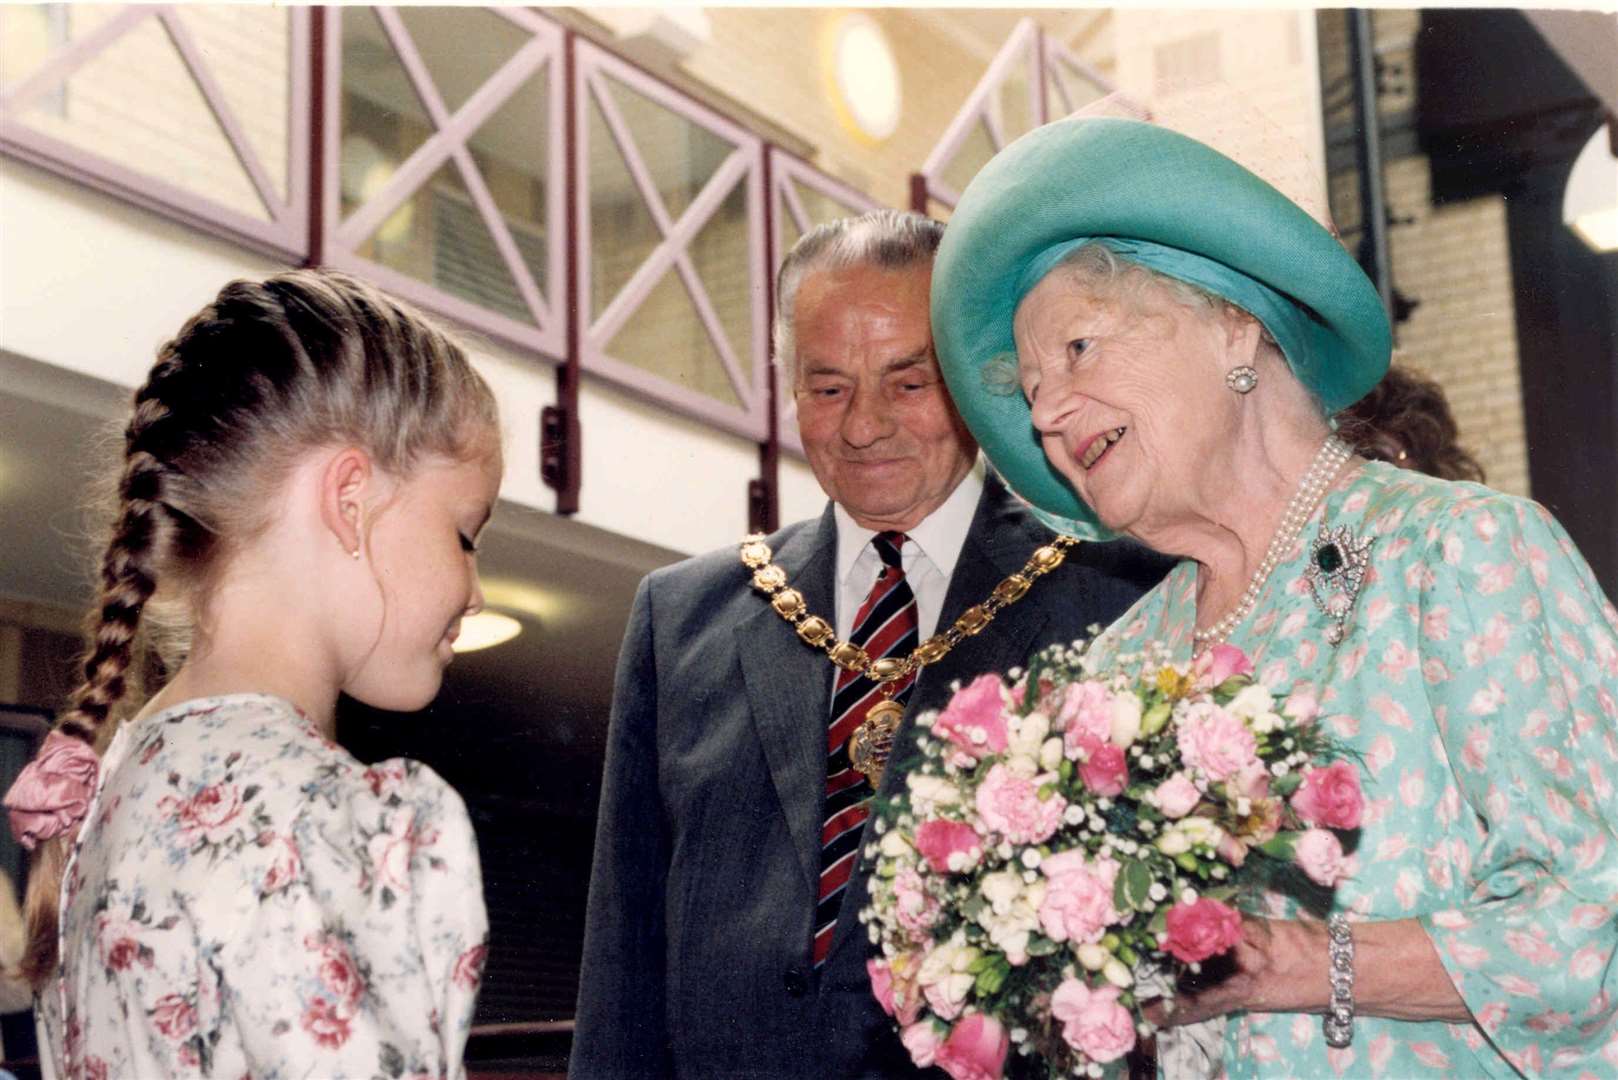 Nicola Clark, 10, presented the Queen Mother with a posy when she visited Sunny Corner sheltered housing scheme for the elderly at Aylcliffe, Dover, in July 1995